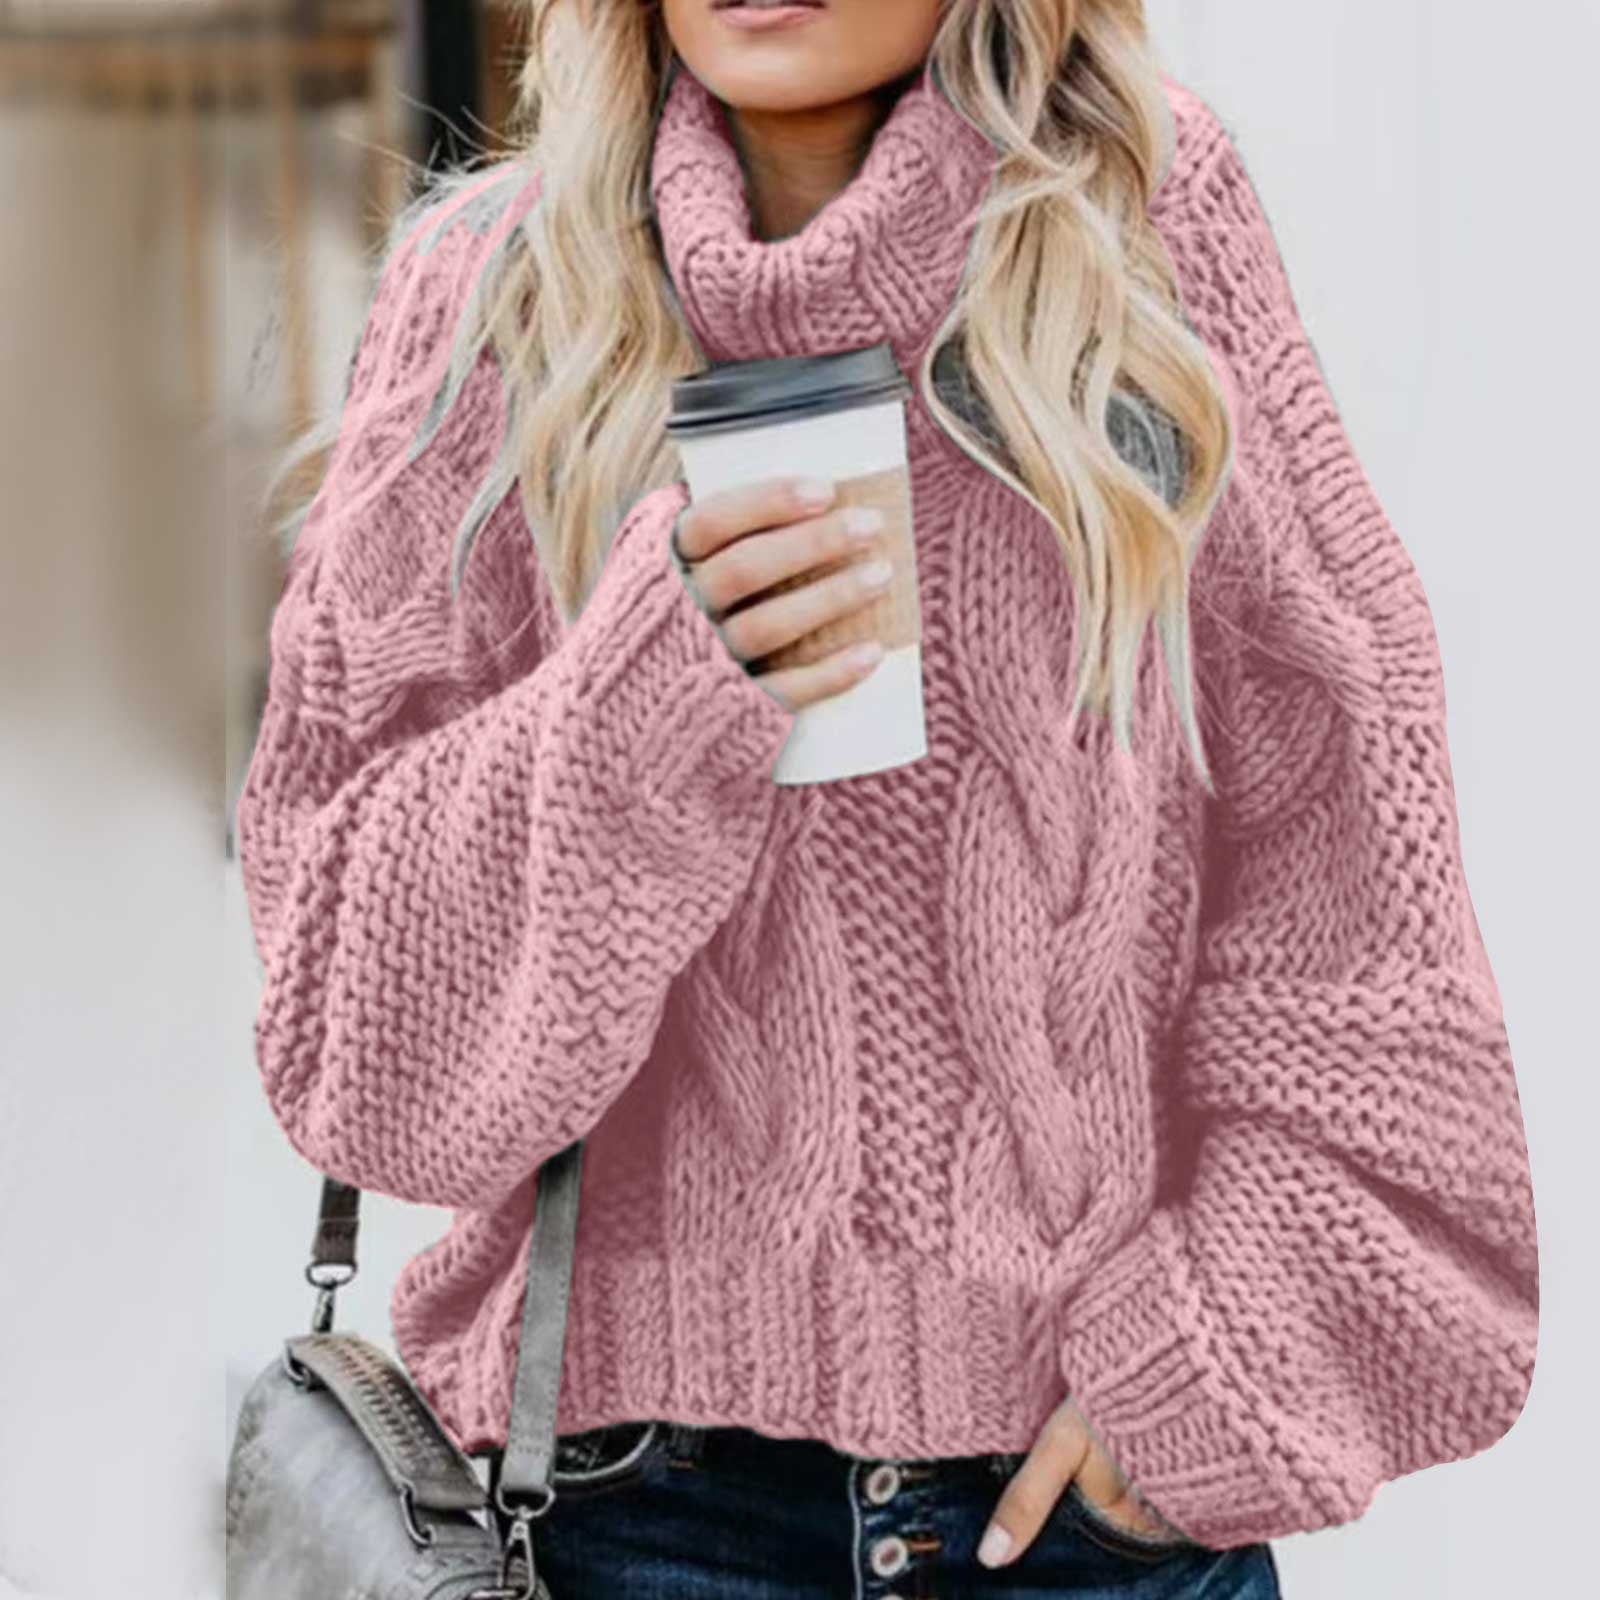 Hfyihgf Casual Knitted Sweater Tops for Women Cable Knit Long Lantern  Sleeve Turtleneck Sweaters Fall Winter Warm Oversized Pullover Jumpers(Pink,S)  